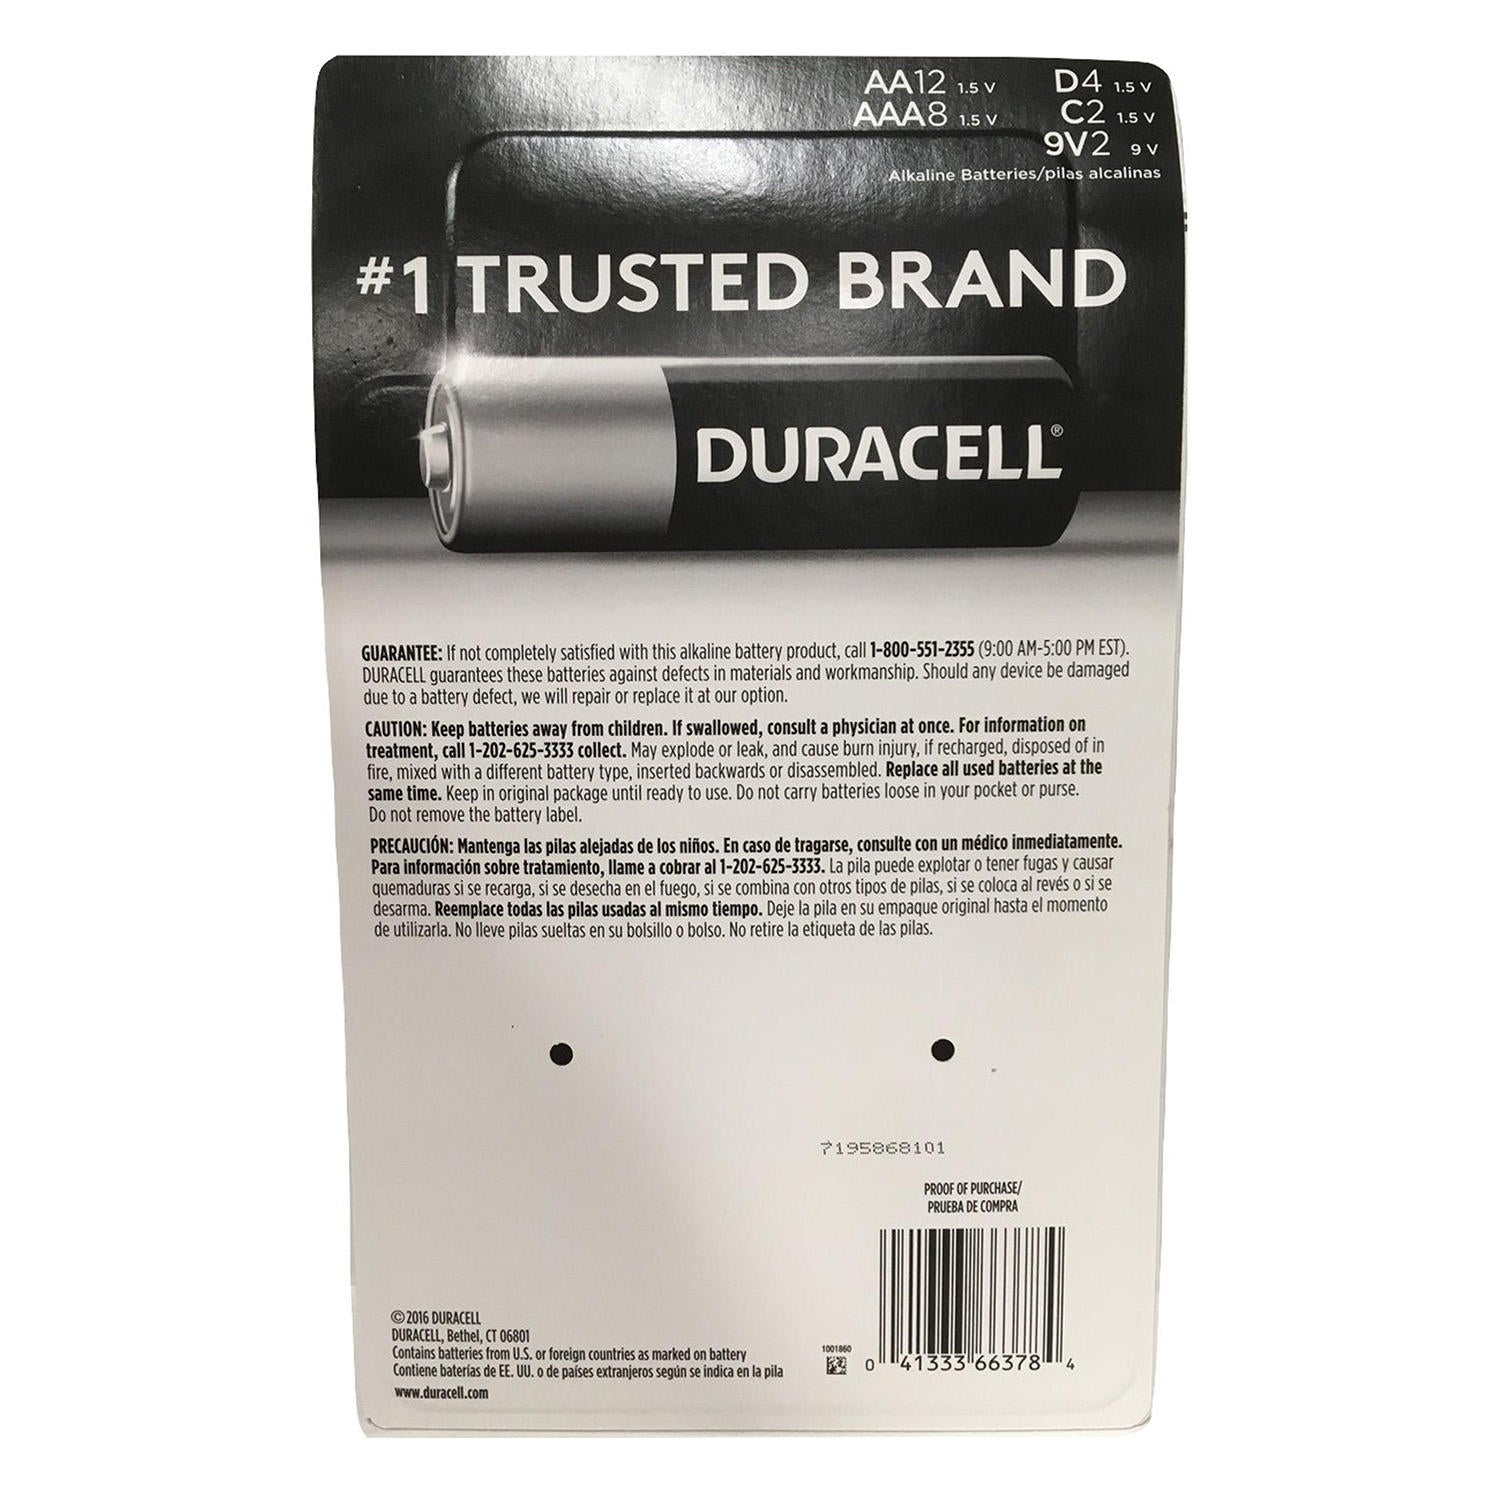 Duracell Coppertop Alkaline AA, AAA, C, D, and 9V Batteries